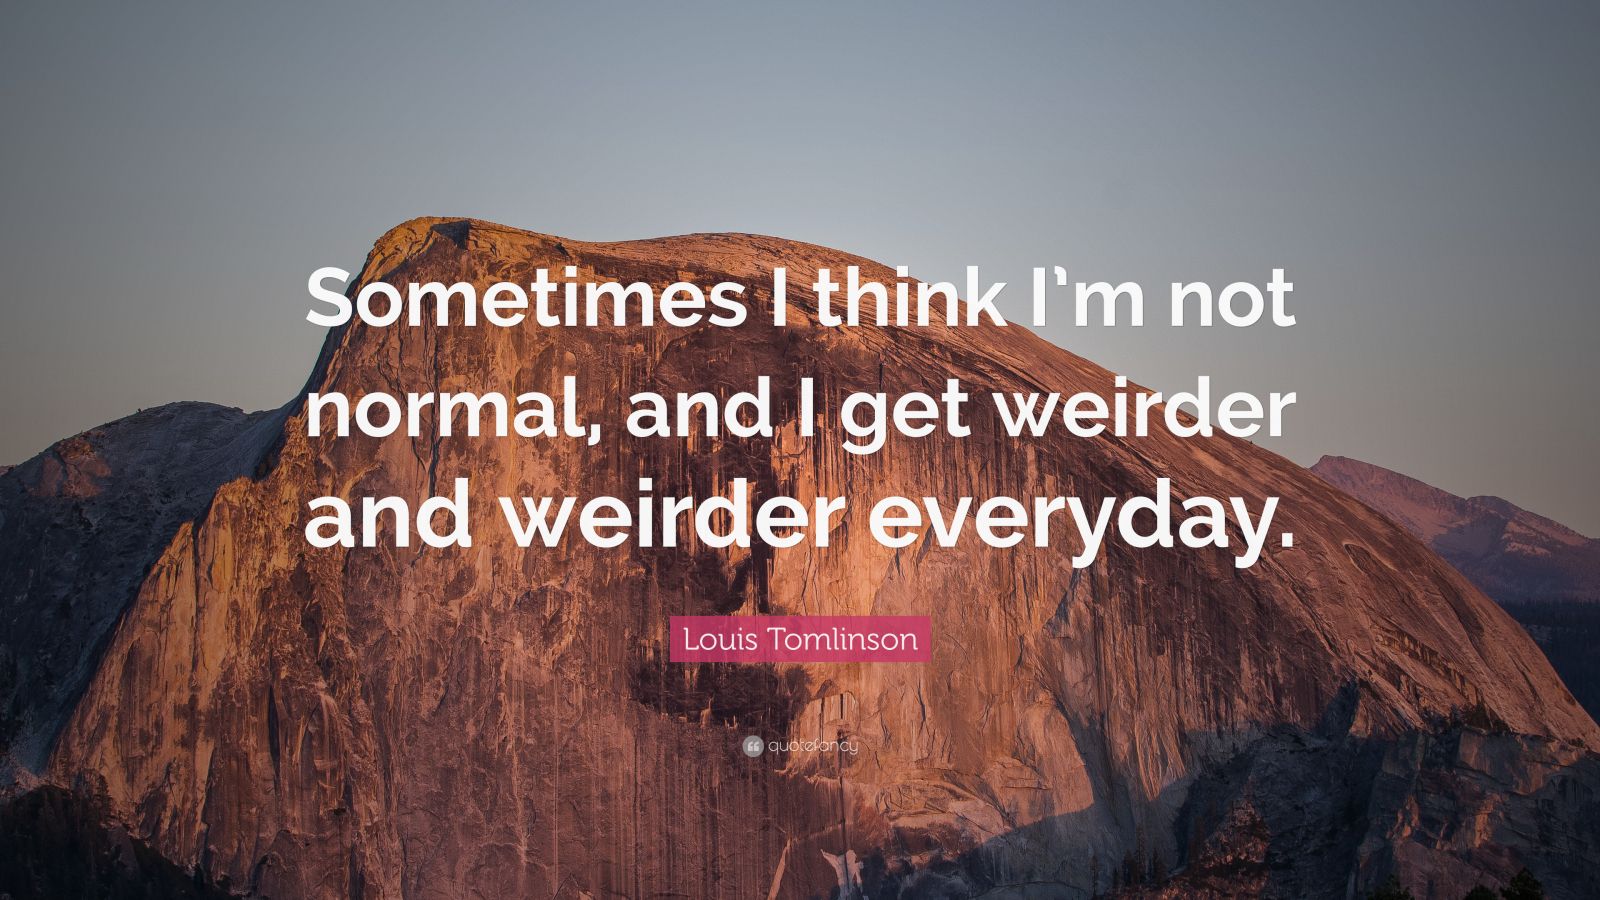 Louis Tomlinson Quote: “Sometimes I think I’m not normal, and I get